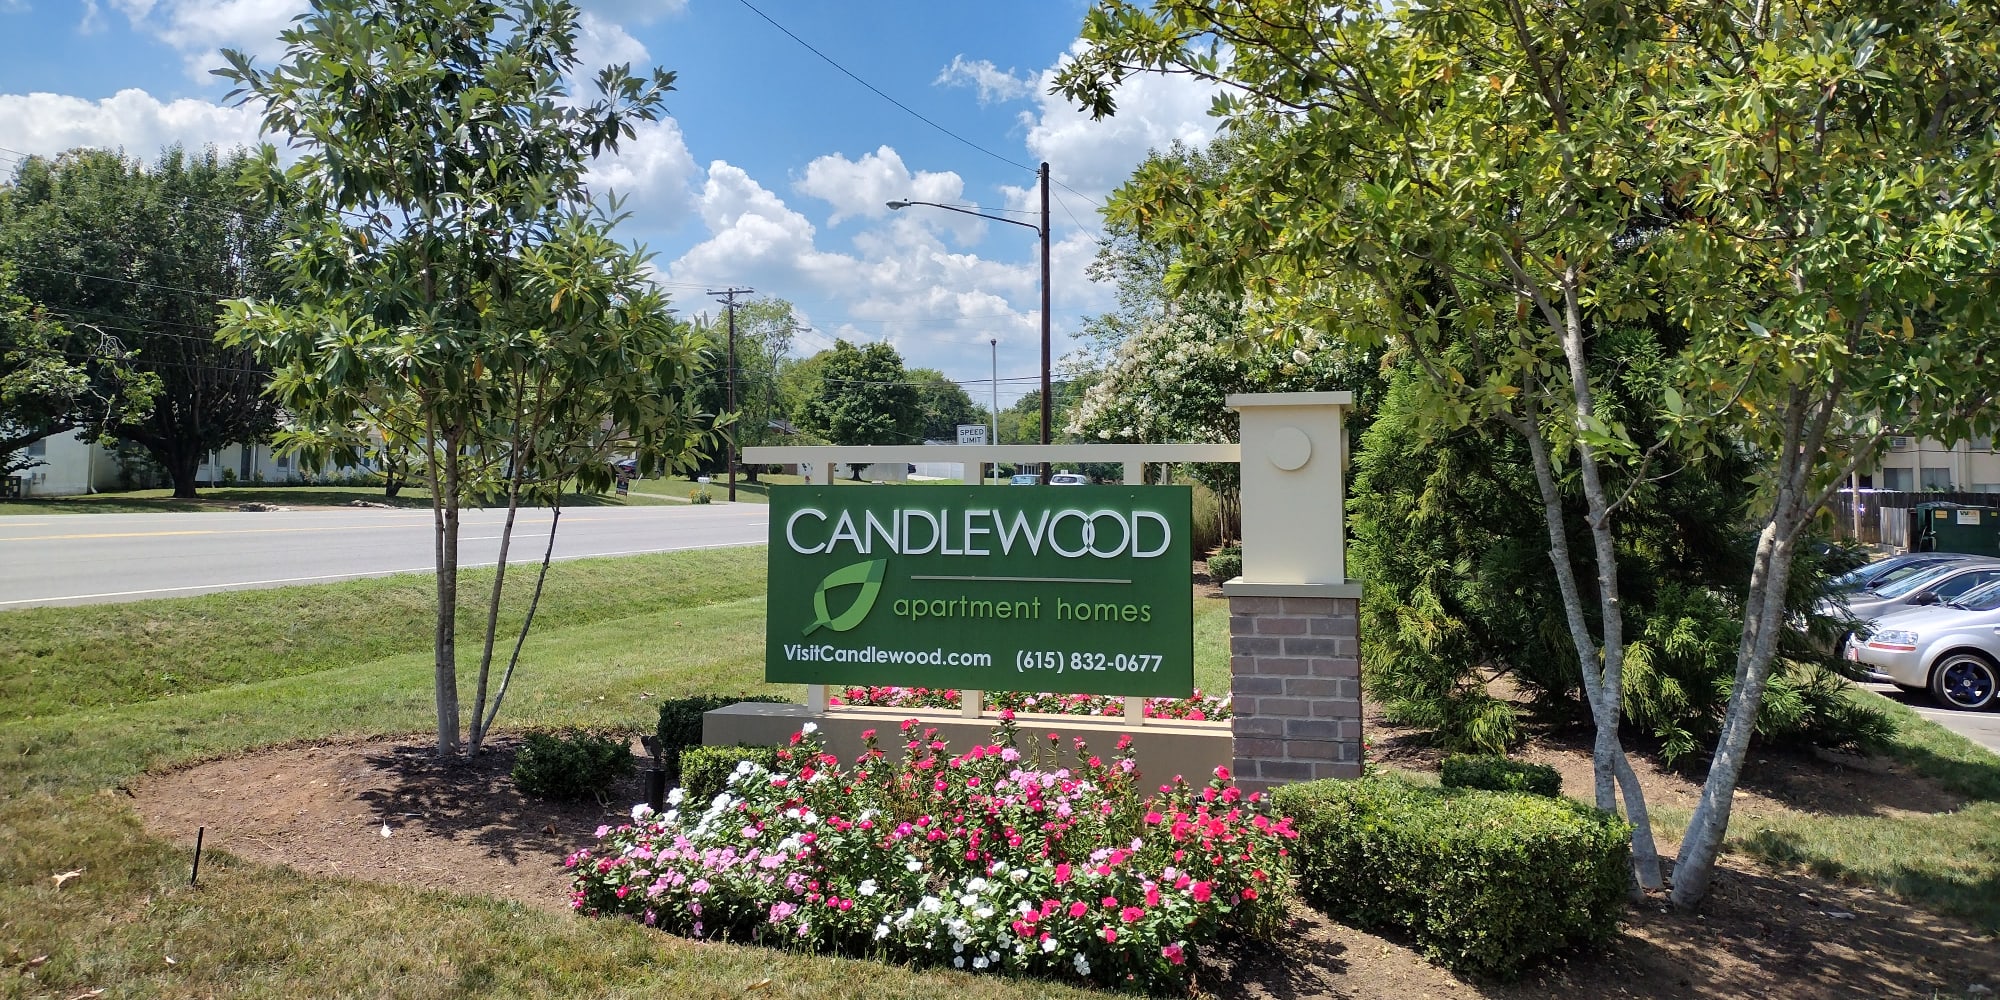 Candlewood Apartment Homes in Nashville, Tennessee